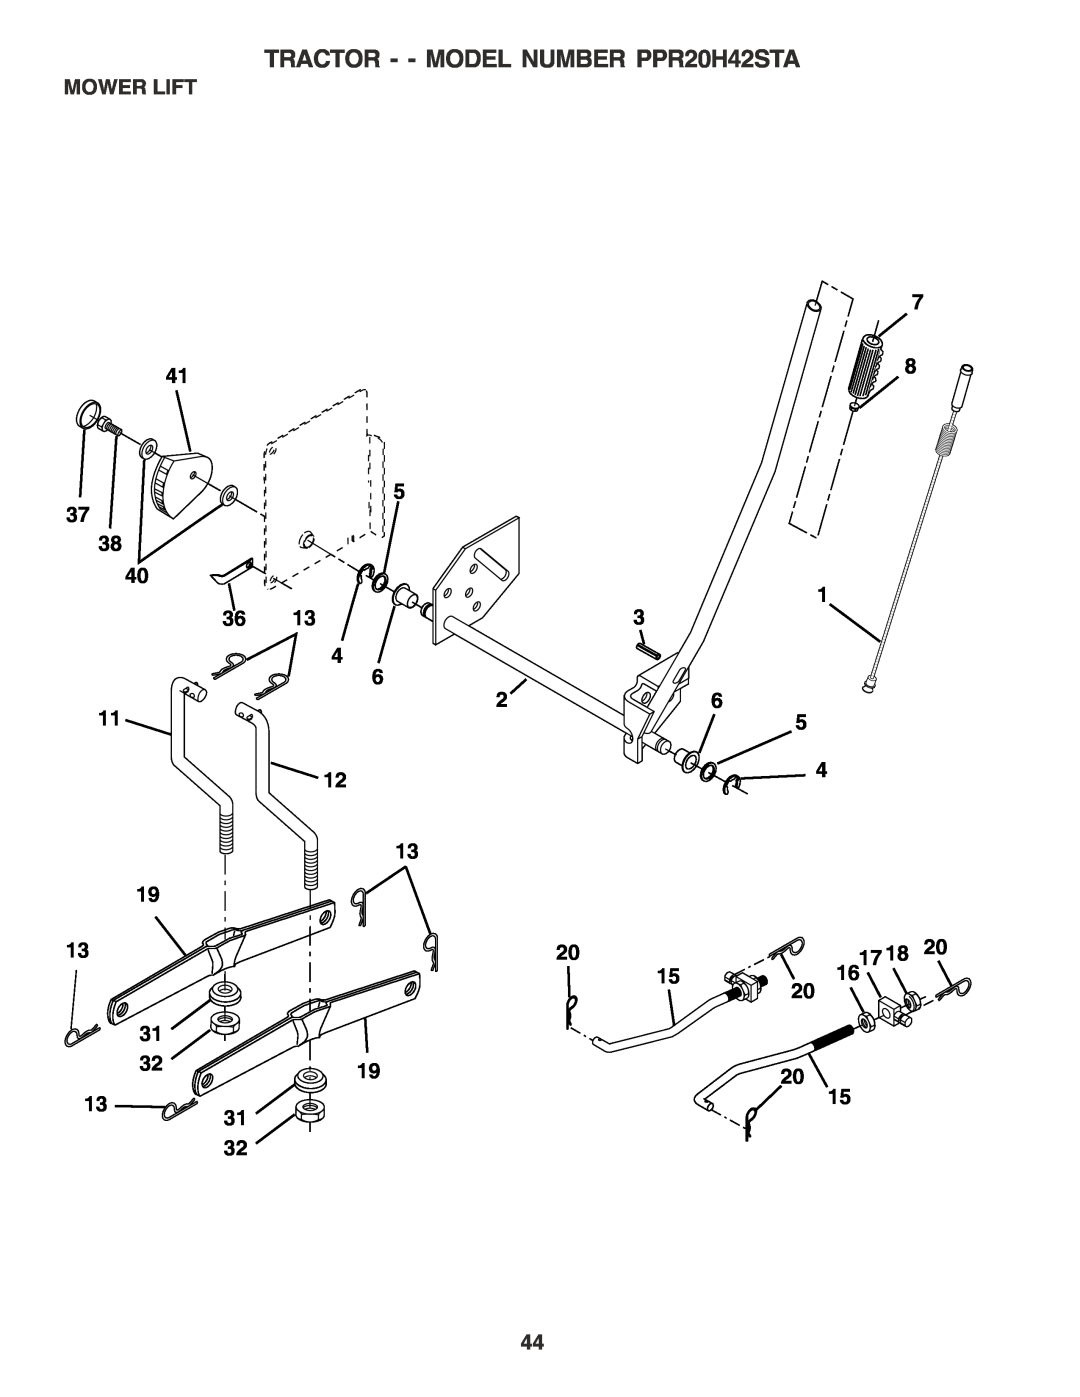 Poulan 182770 owner manual Mower Lift, 41 37 38 40 11 19 13, TRACTOR - - MODEL NUMBER PPR20H42STA 